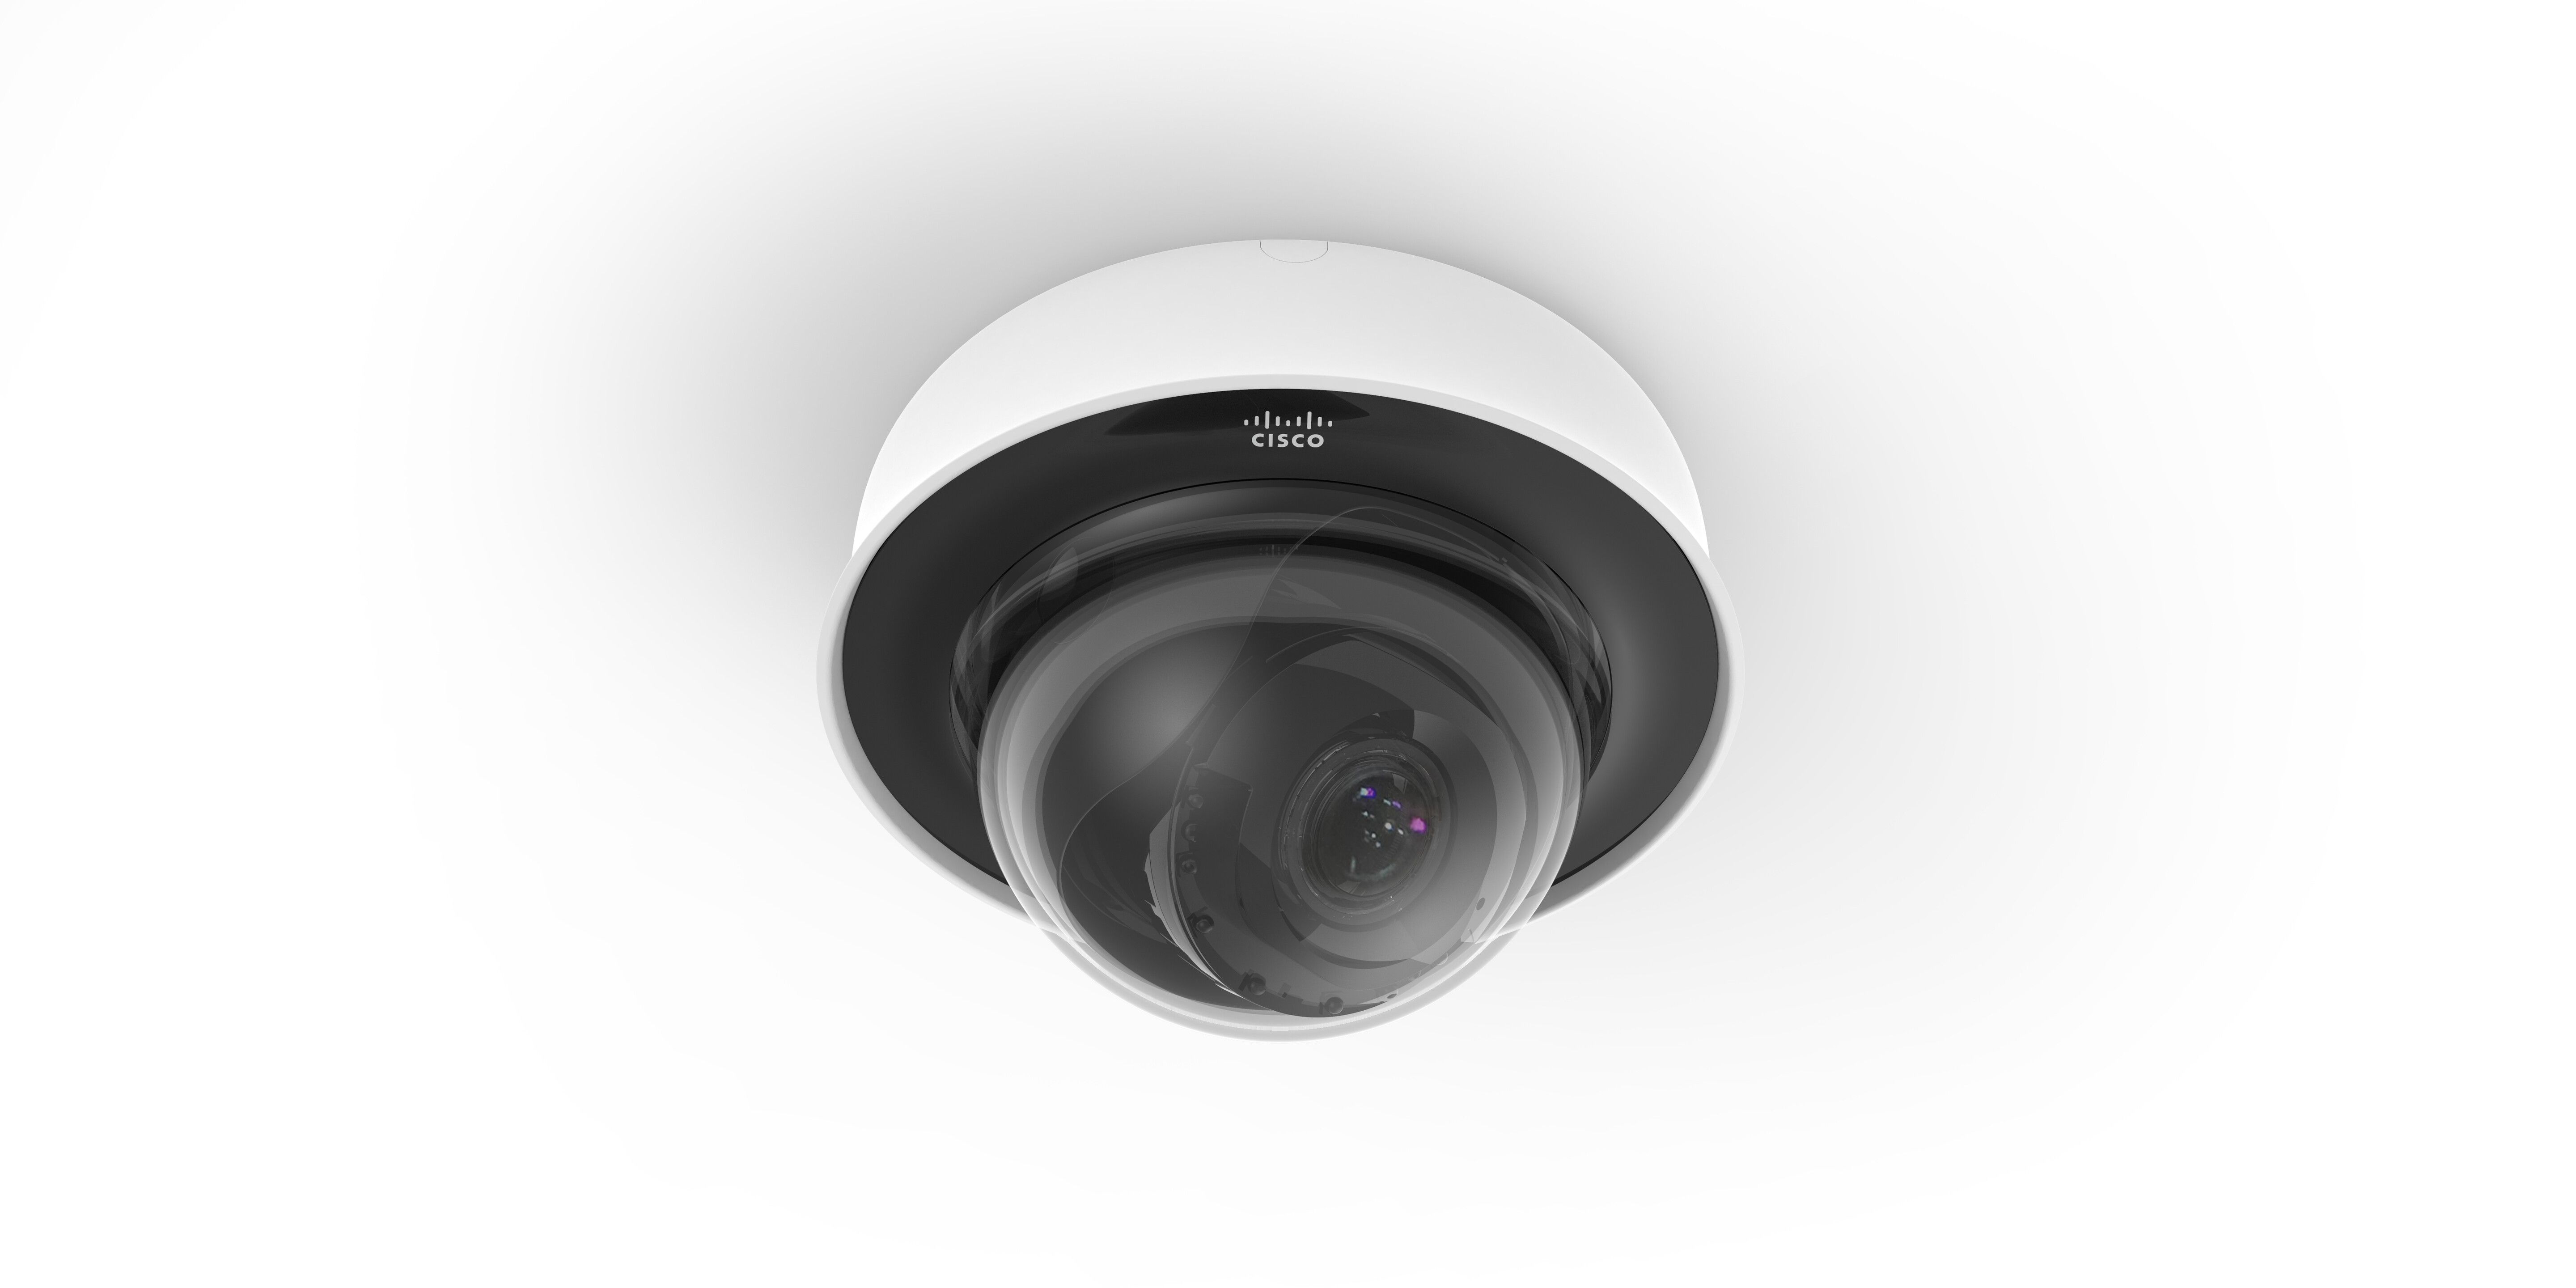 The MV22 smart camera mounted to the ceiling via its white base. The black camera is visible inside its clear dome covering.